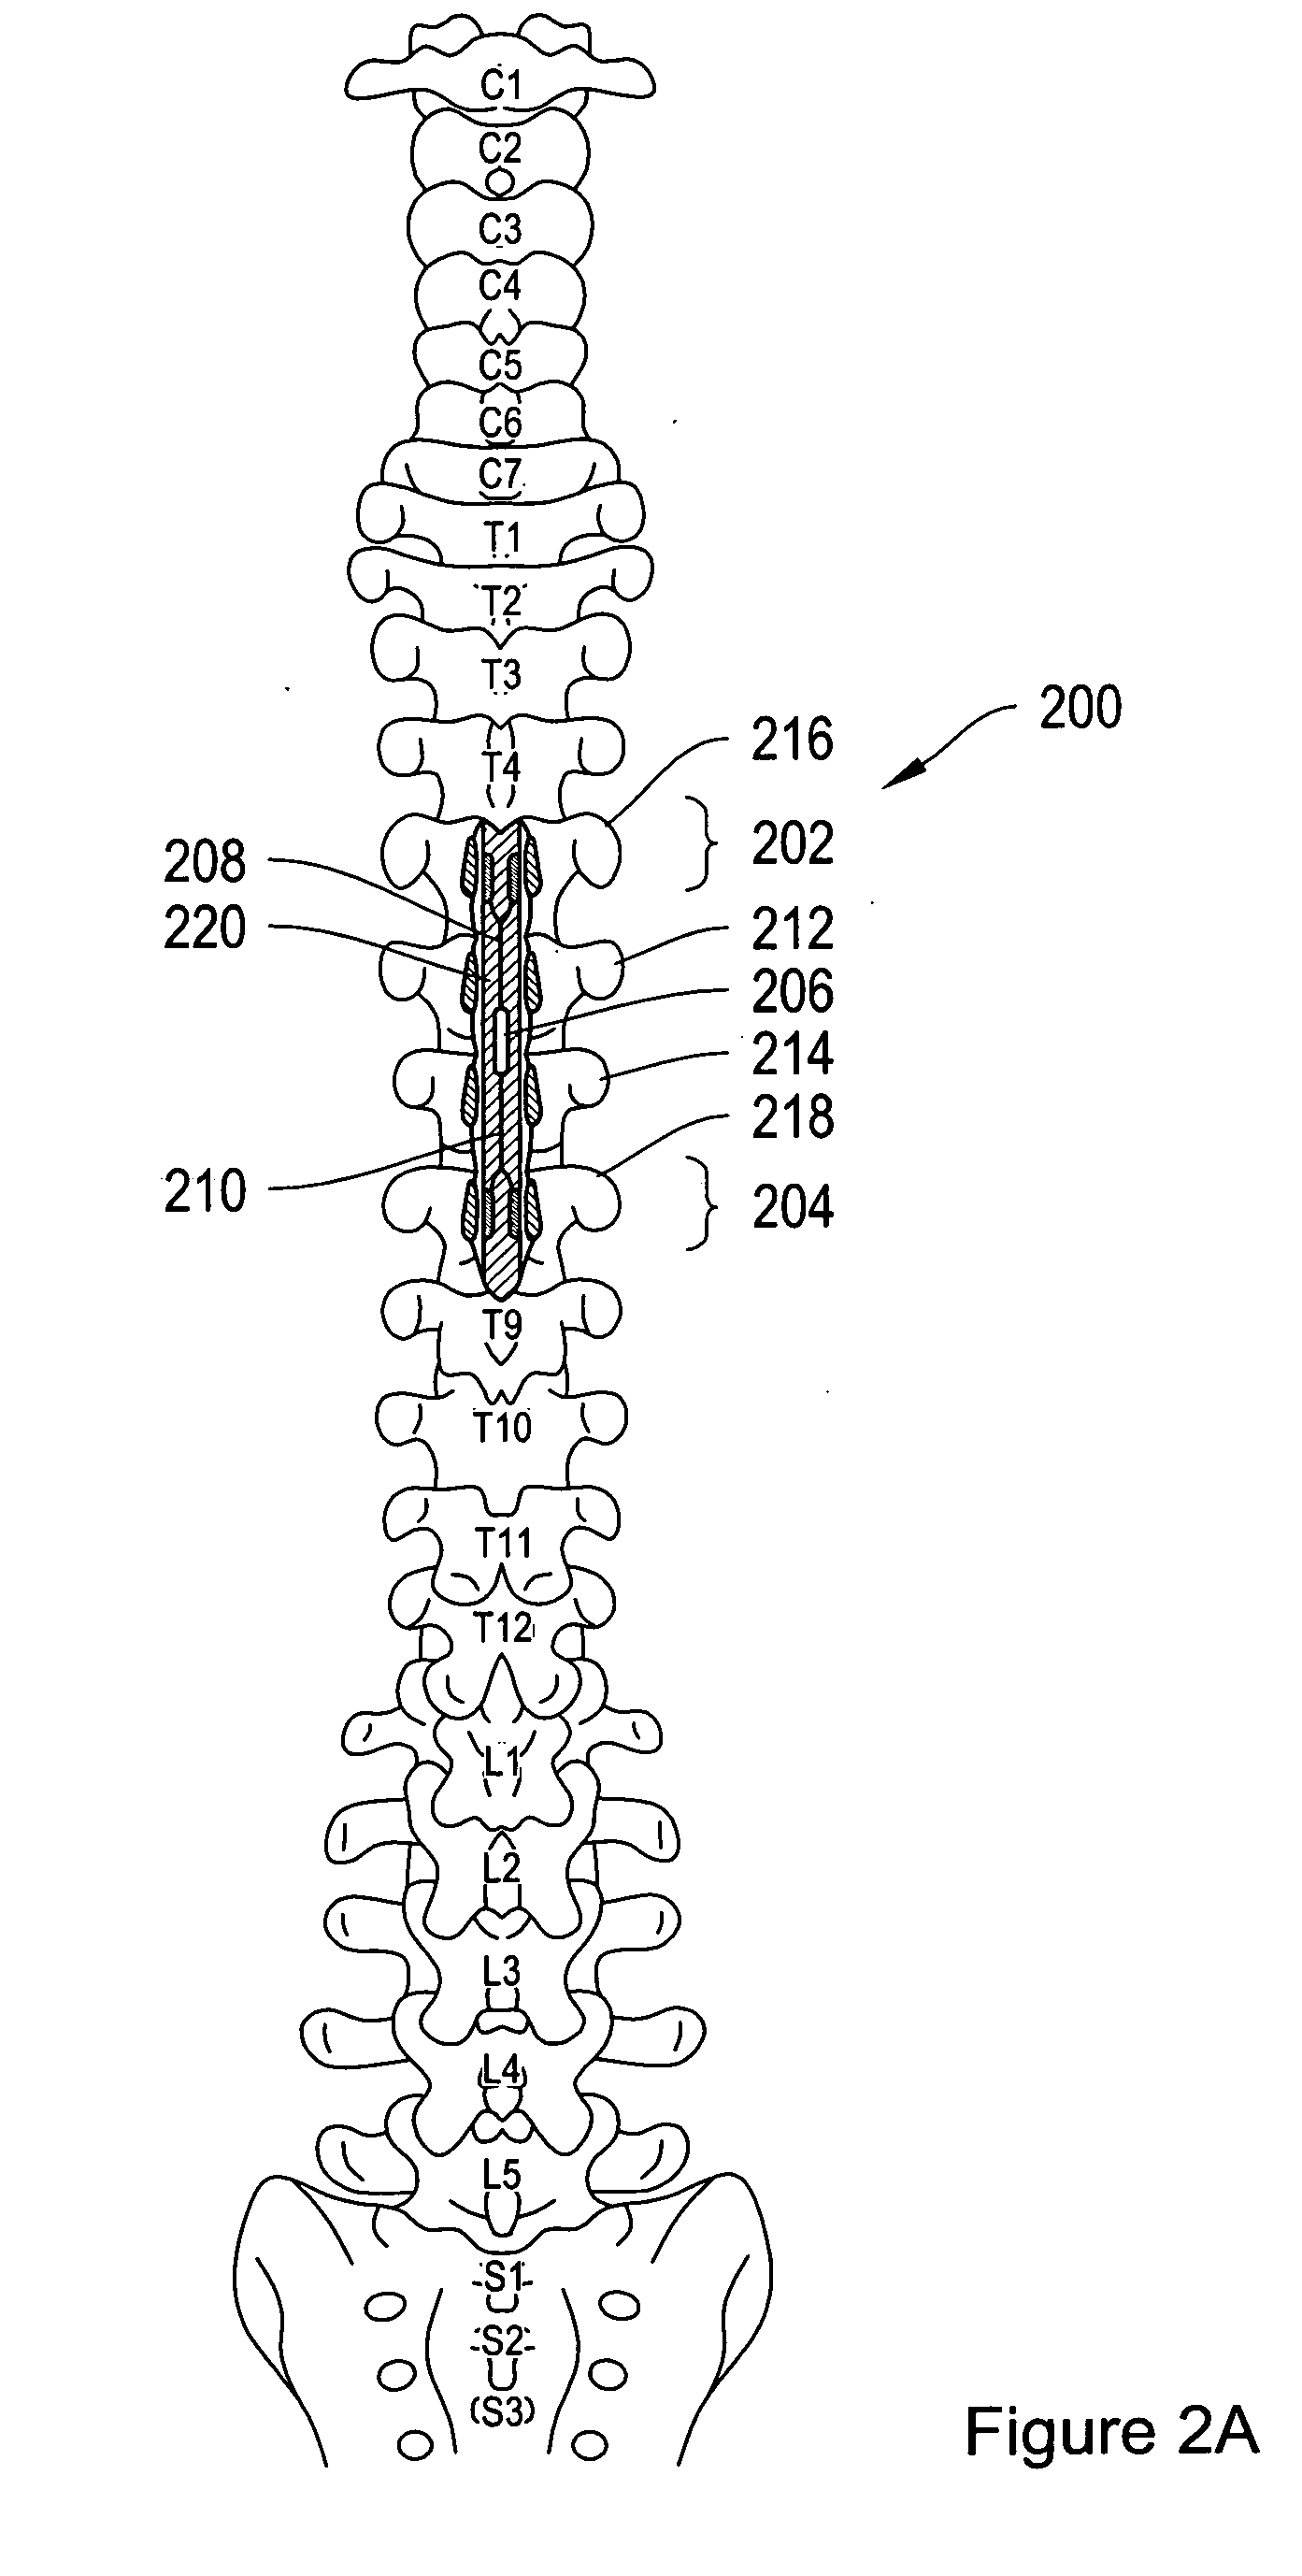 Spinal cord implant systems and methods